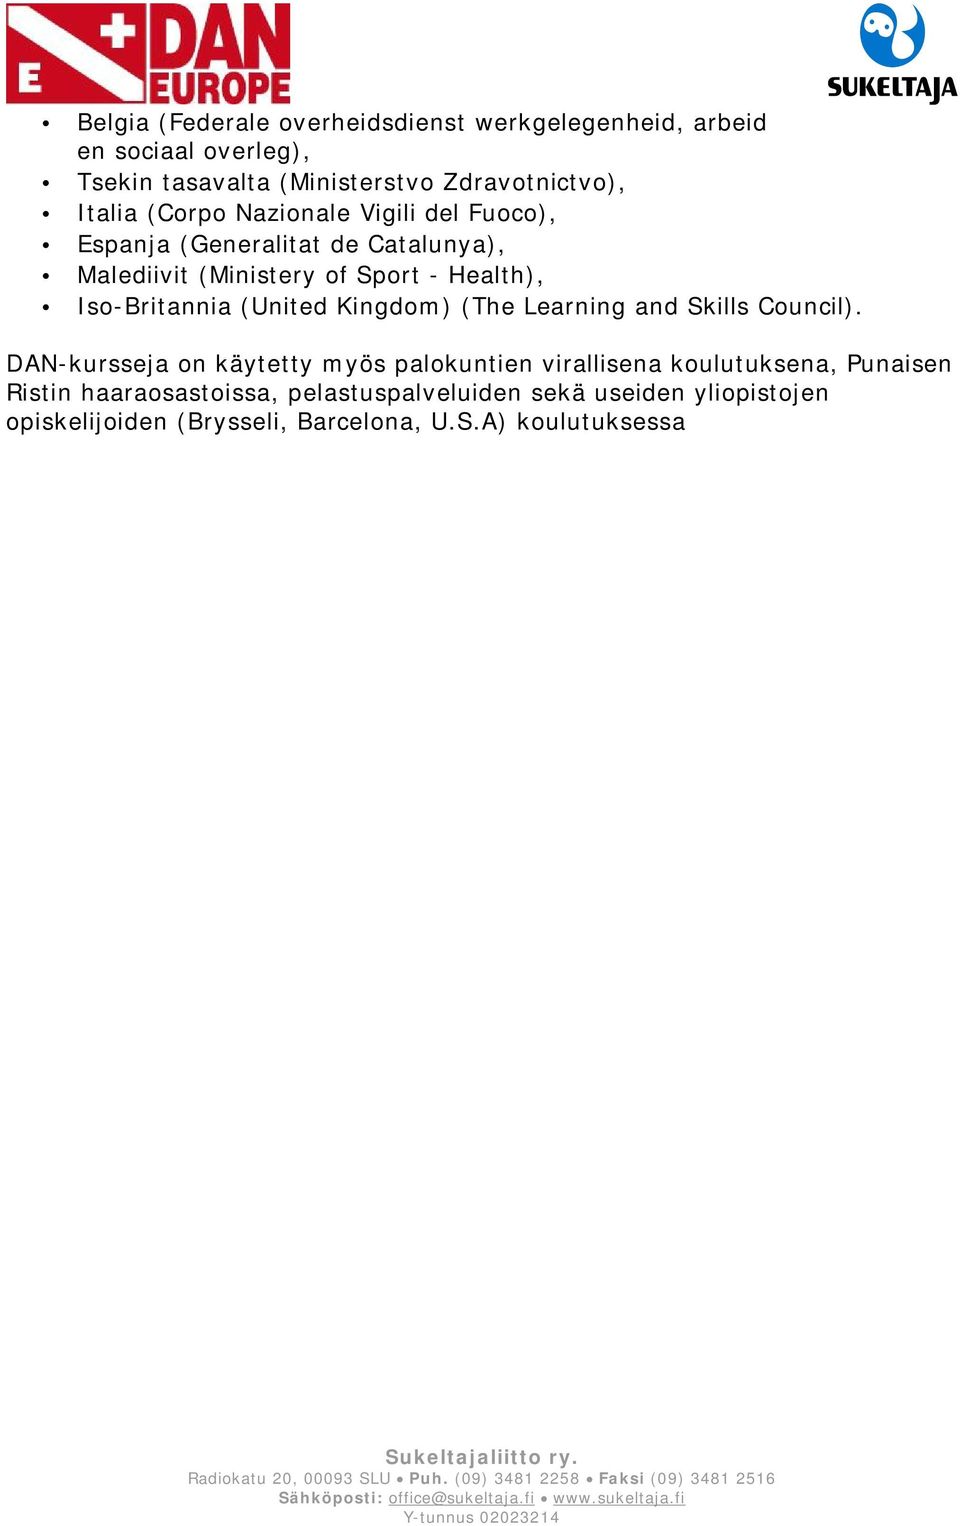 Iso-Britannia (United Kingdom) (The Learning and Skills Council).